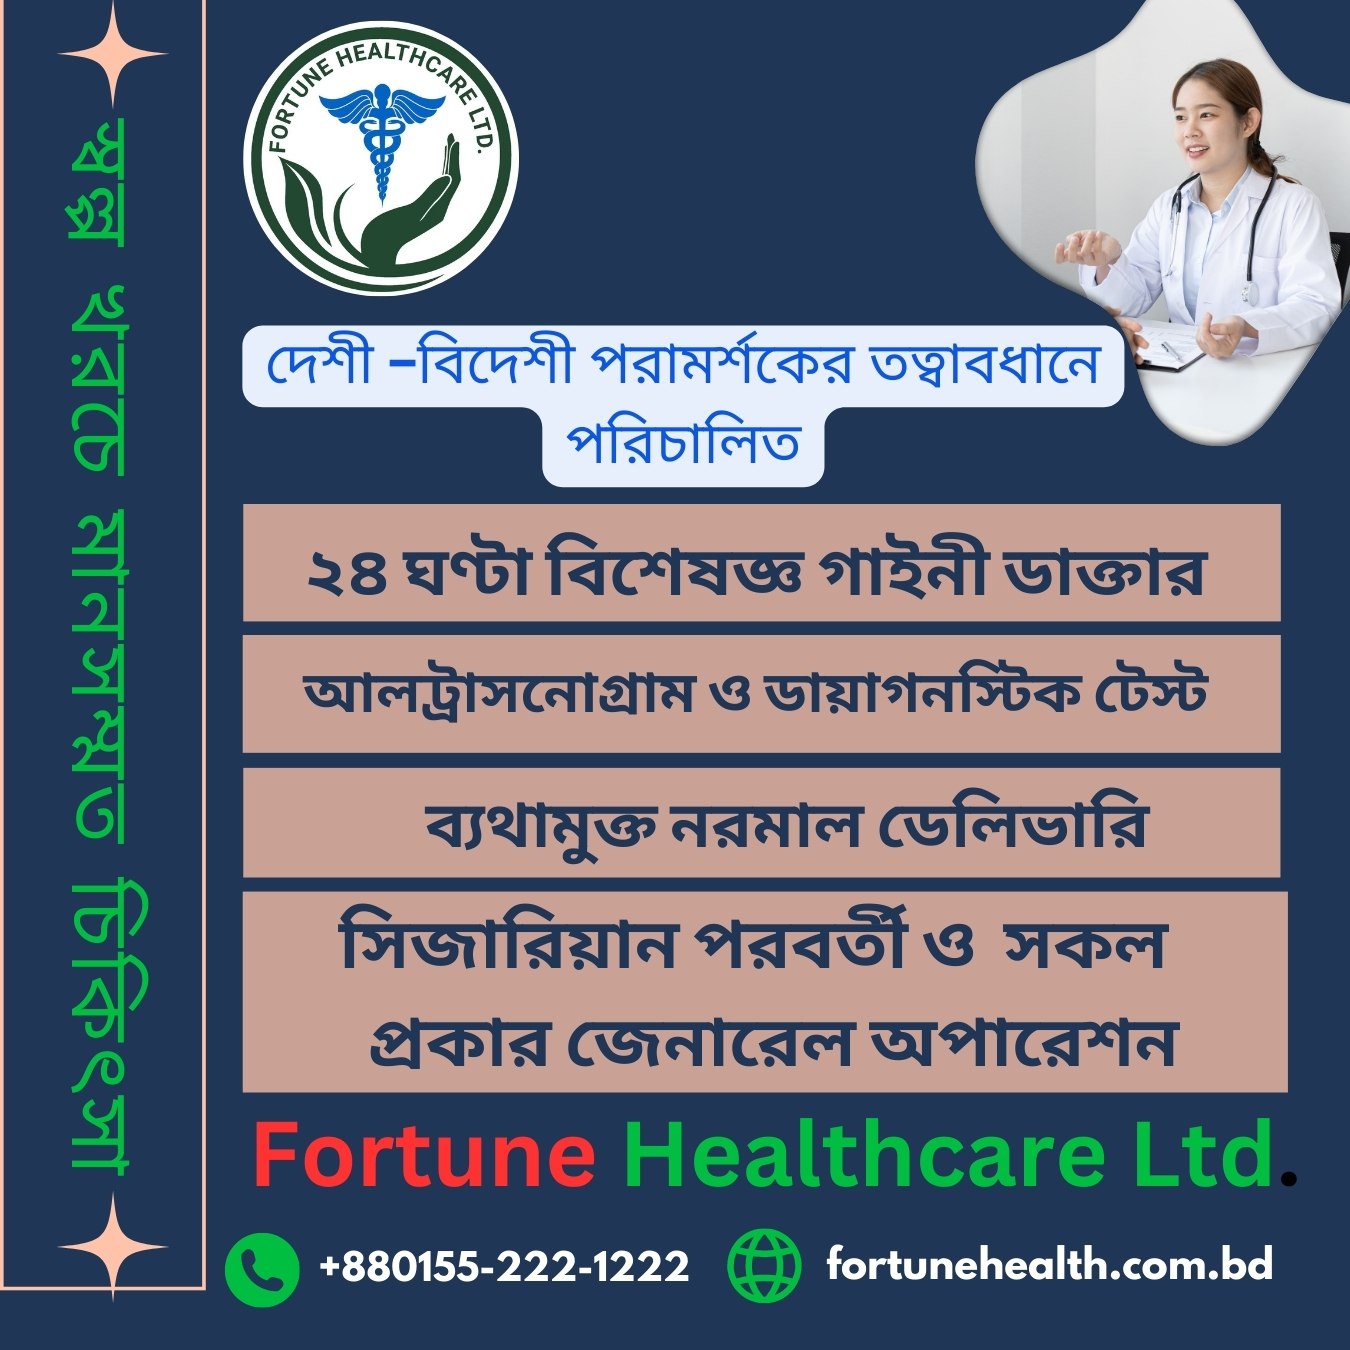 Cancer Screening for Male at Fortune Healthcare Ltd. Hospital